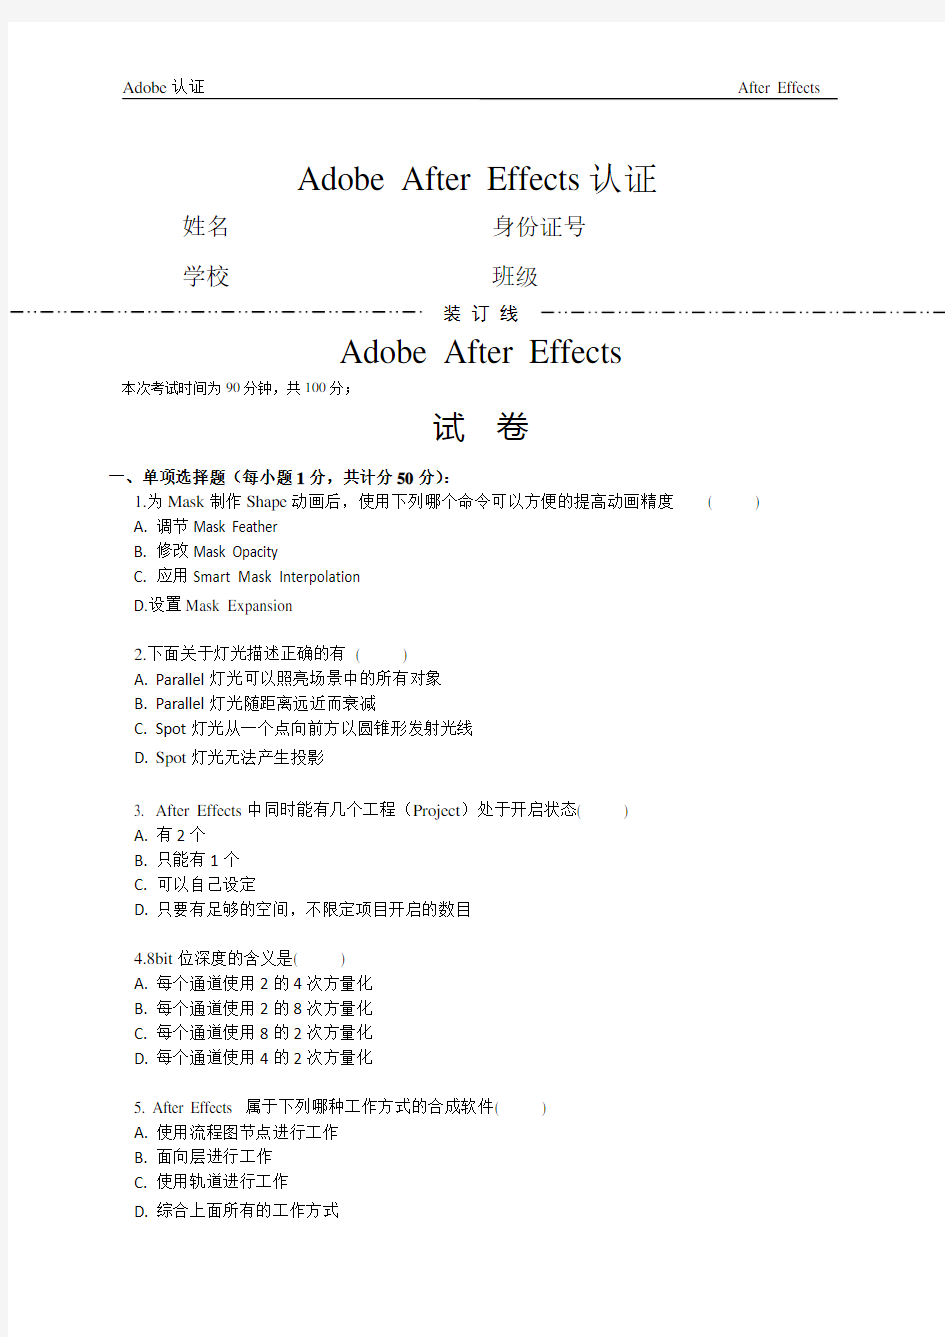 Adobe After Effects考试试卷